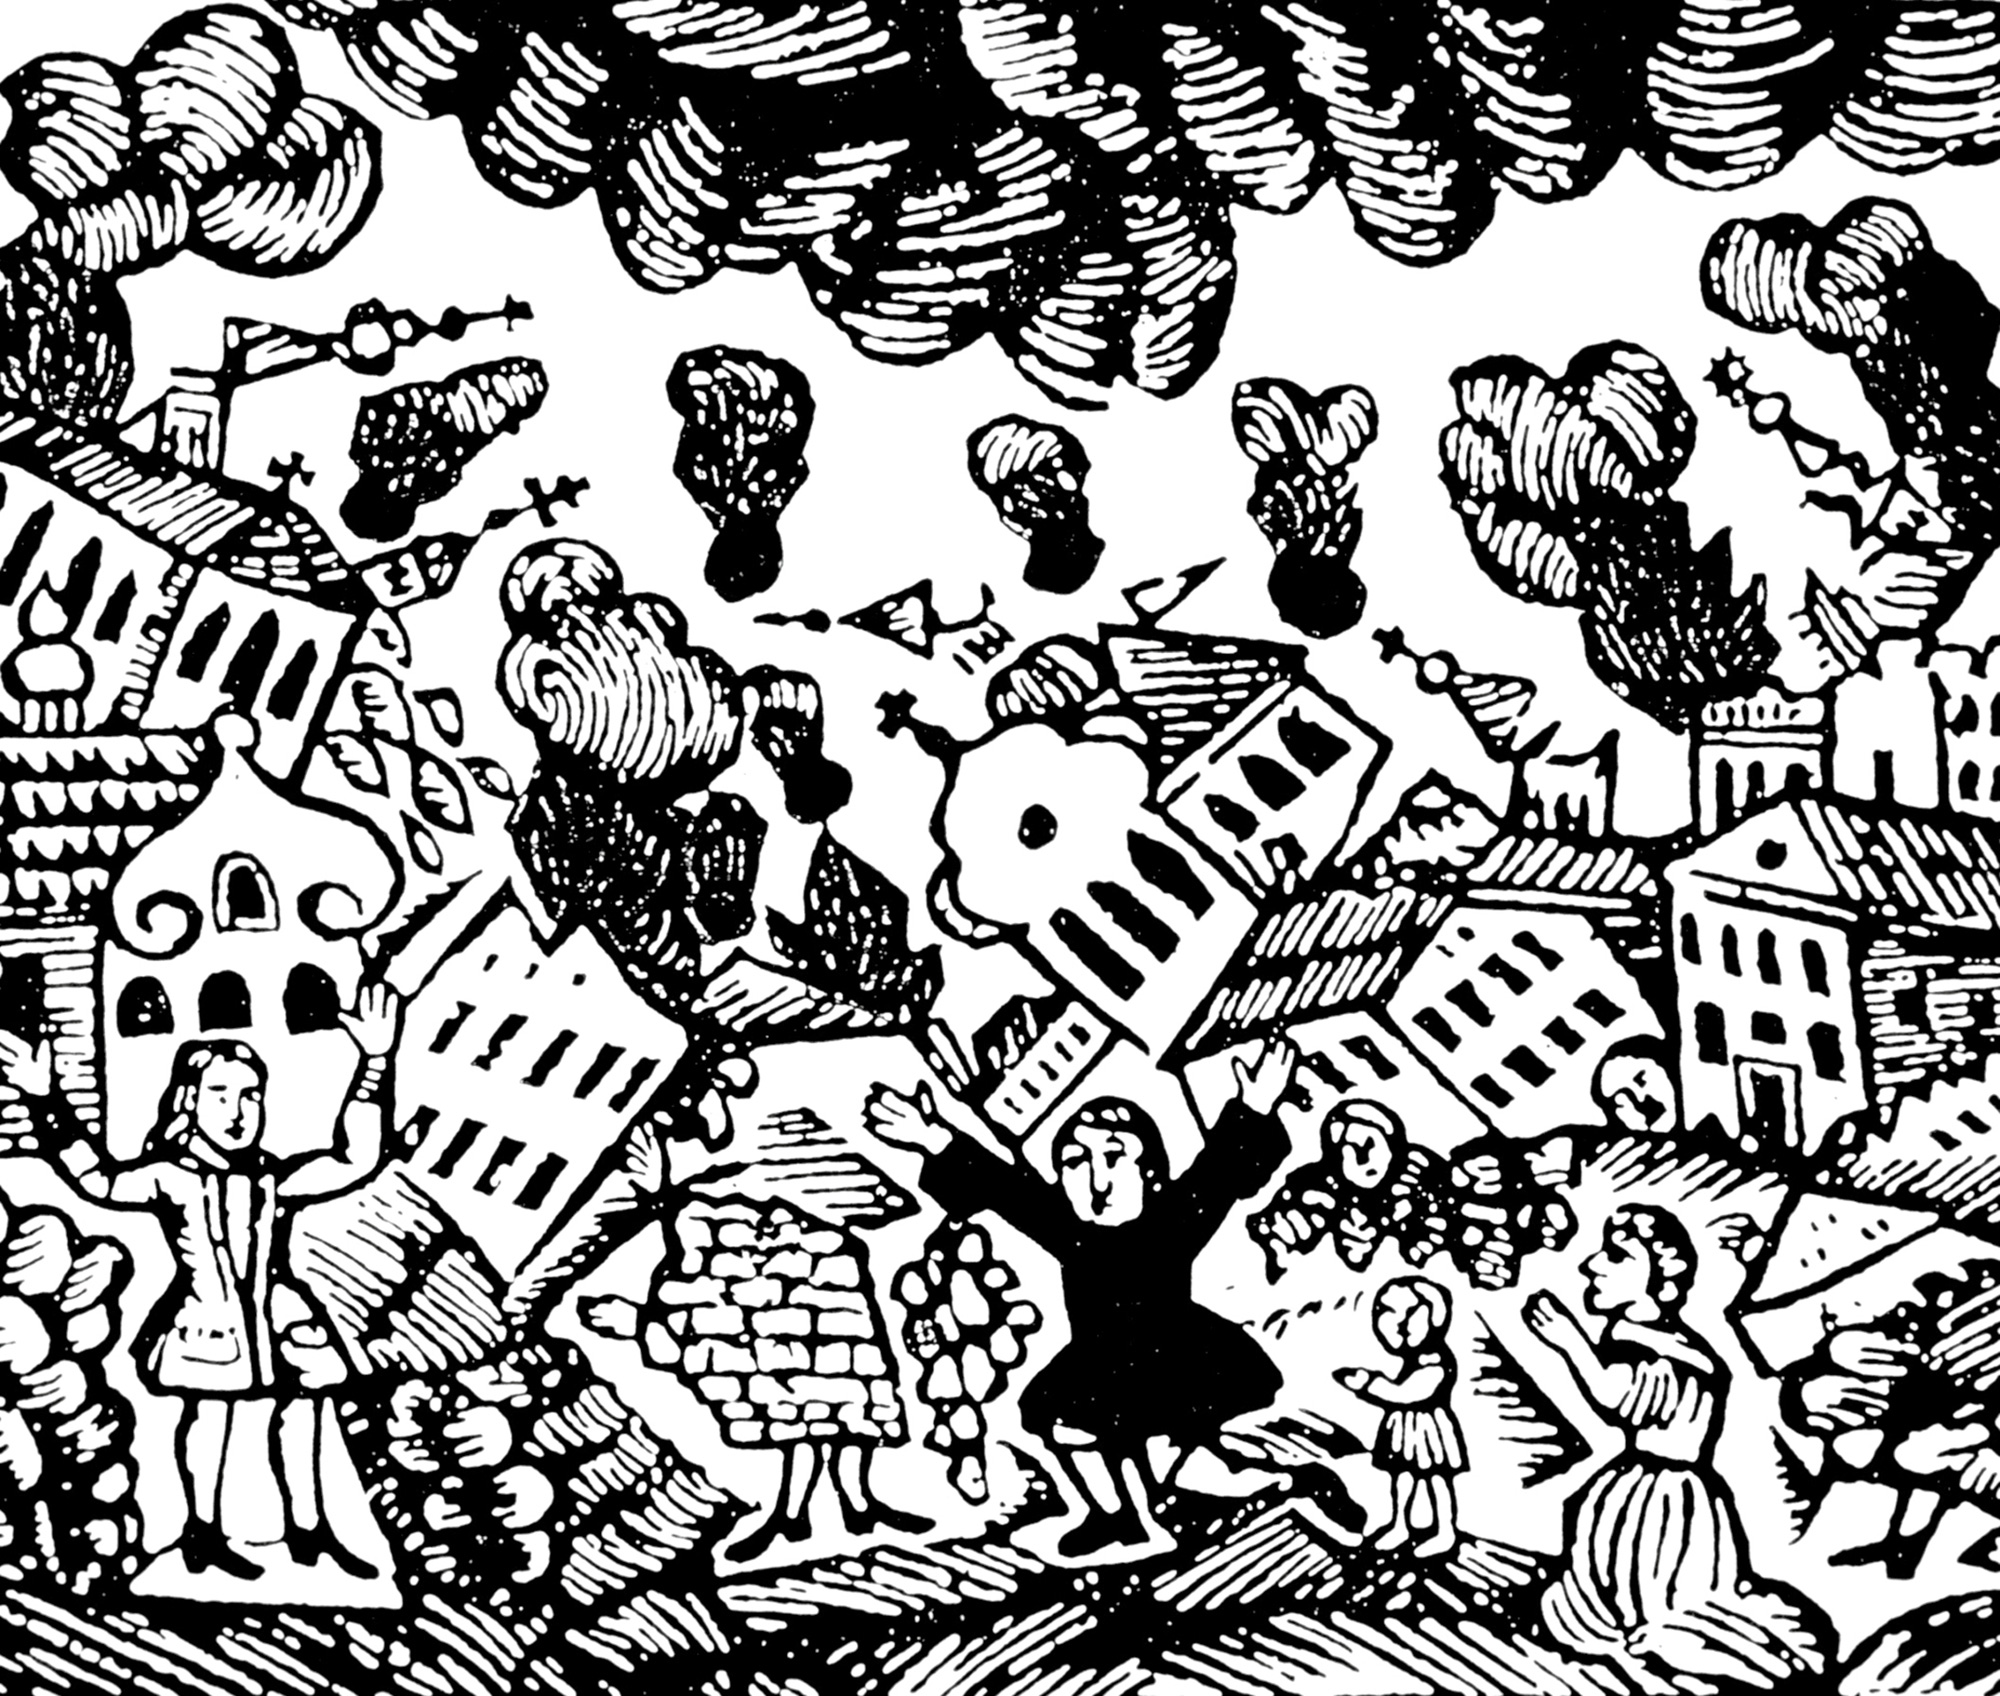 A seventeen fifty-five woodcut from broadside printed in Litomysl, Bohemia, depicting the Lisbon earthquake.